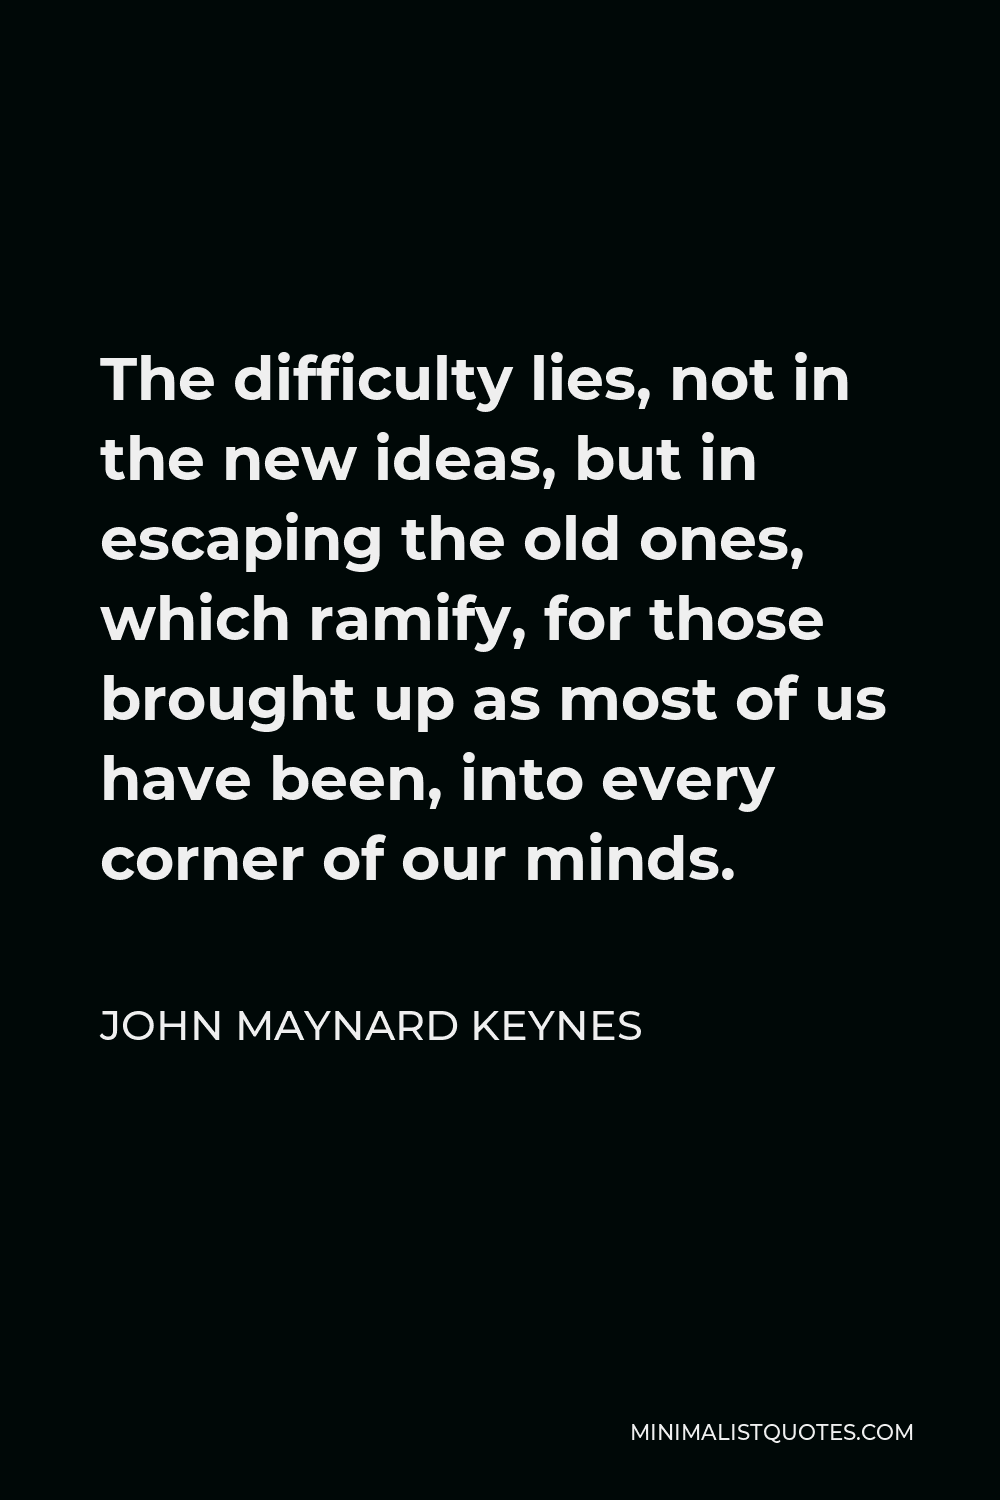 John Maynard Keynes Quote - The difficulty lies, not in the new ideas, but in escaping the old ones, which ramify, for those brought up as most of us have been, into every corner of our minds.